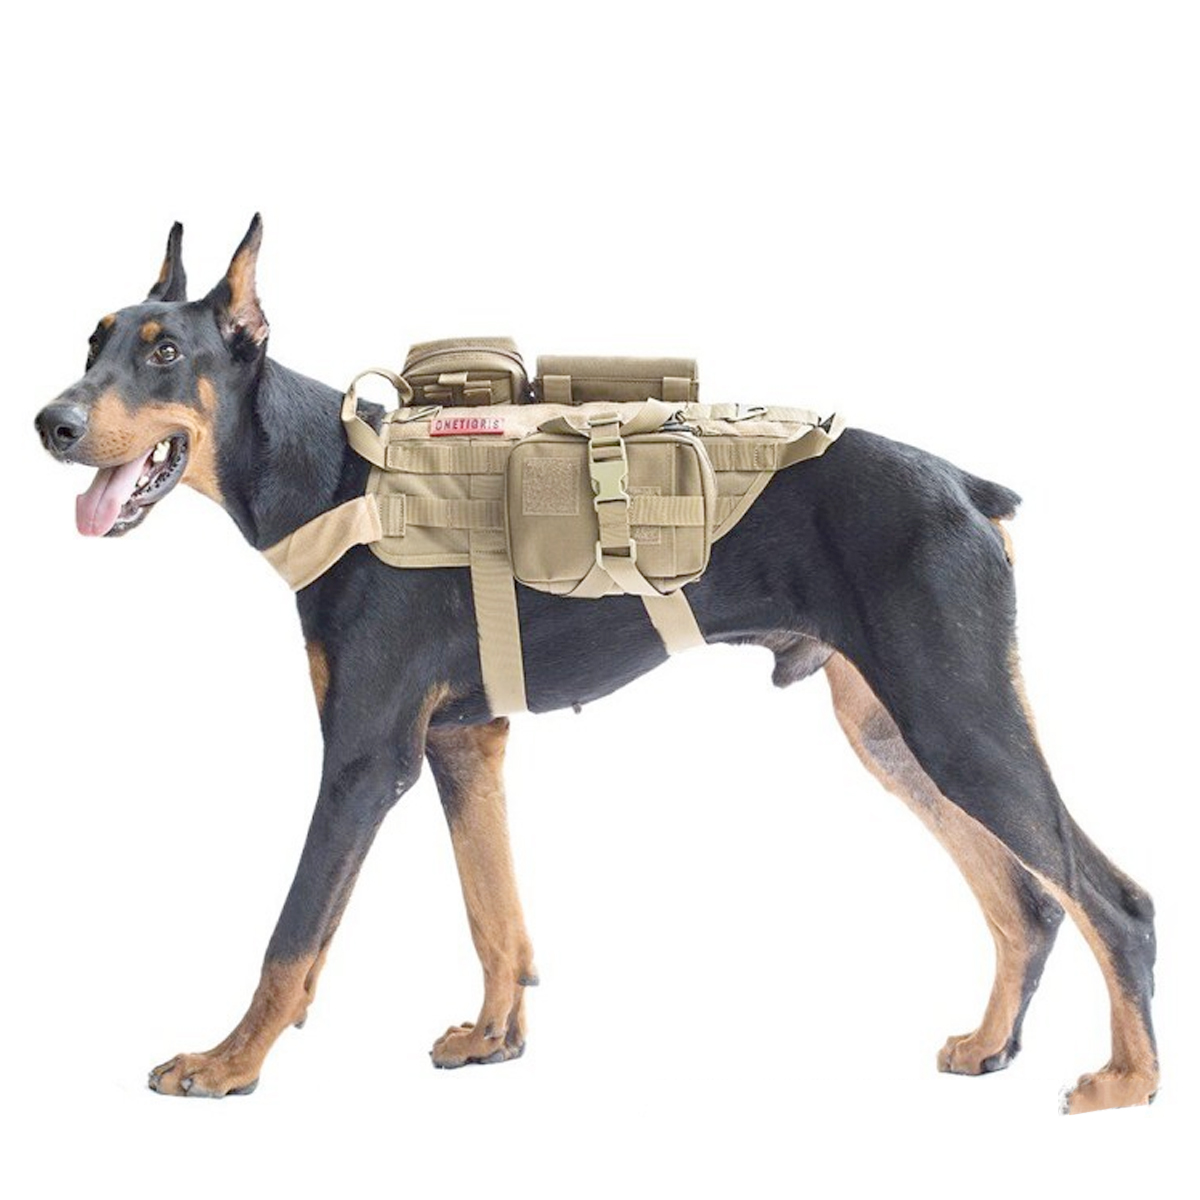 600D-Nylon-Tactical-Dog-Vests-Military-Dog-Clothes-with-Storage-Bag-Training-Load-Bearing-Harness-1817367-2